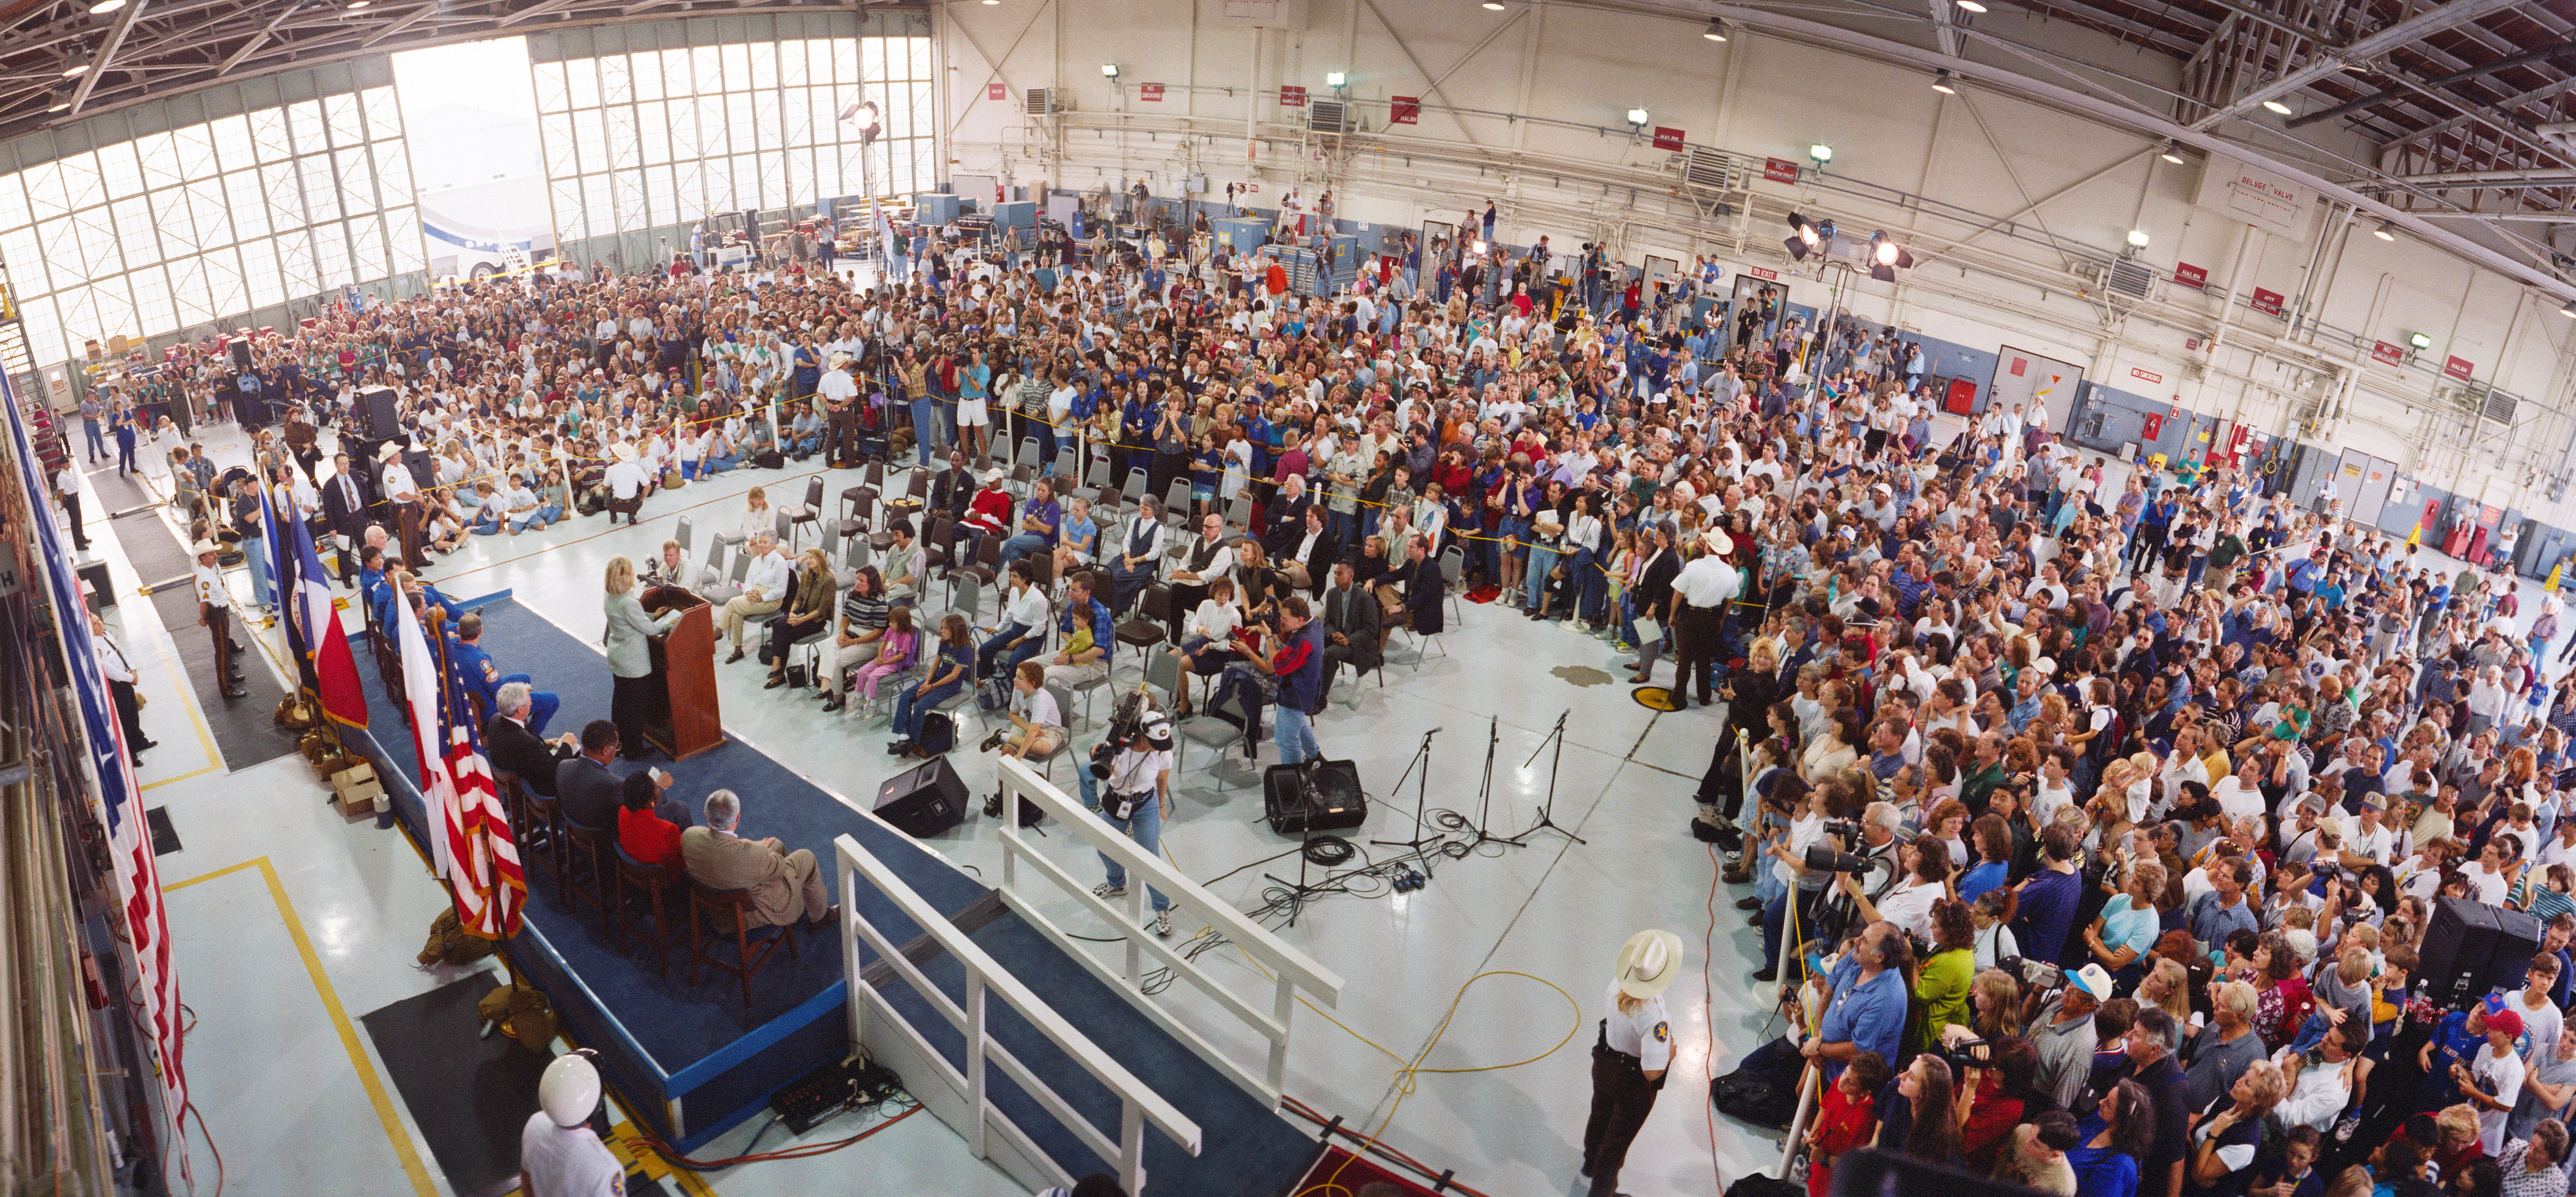 U.S. Senator Kay Bailey Hutchison addresses the crowd at Ellington Field gathered to welcome the STS-95 crew back to Houston